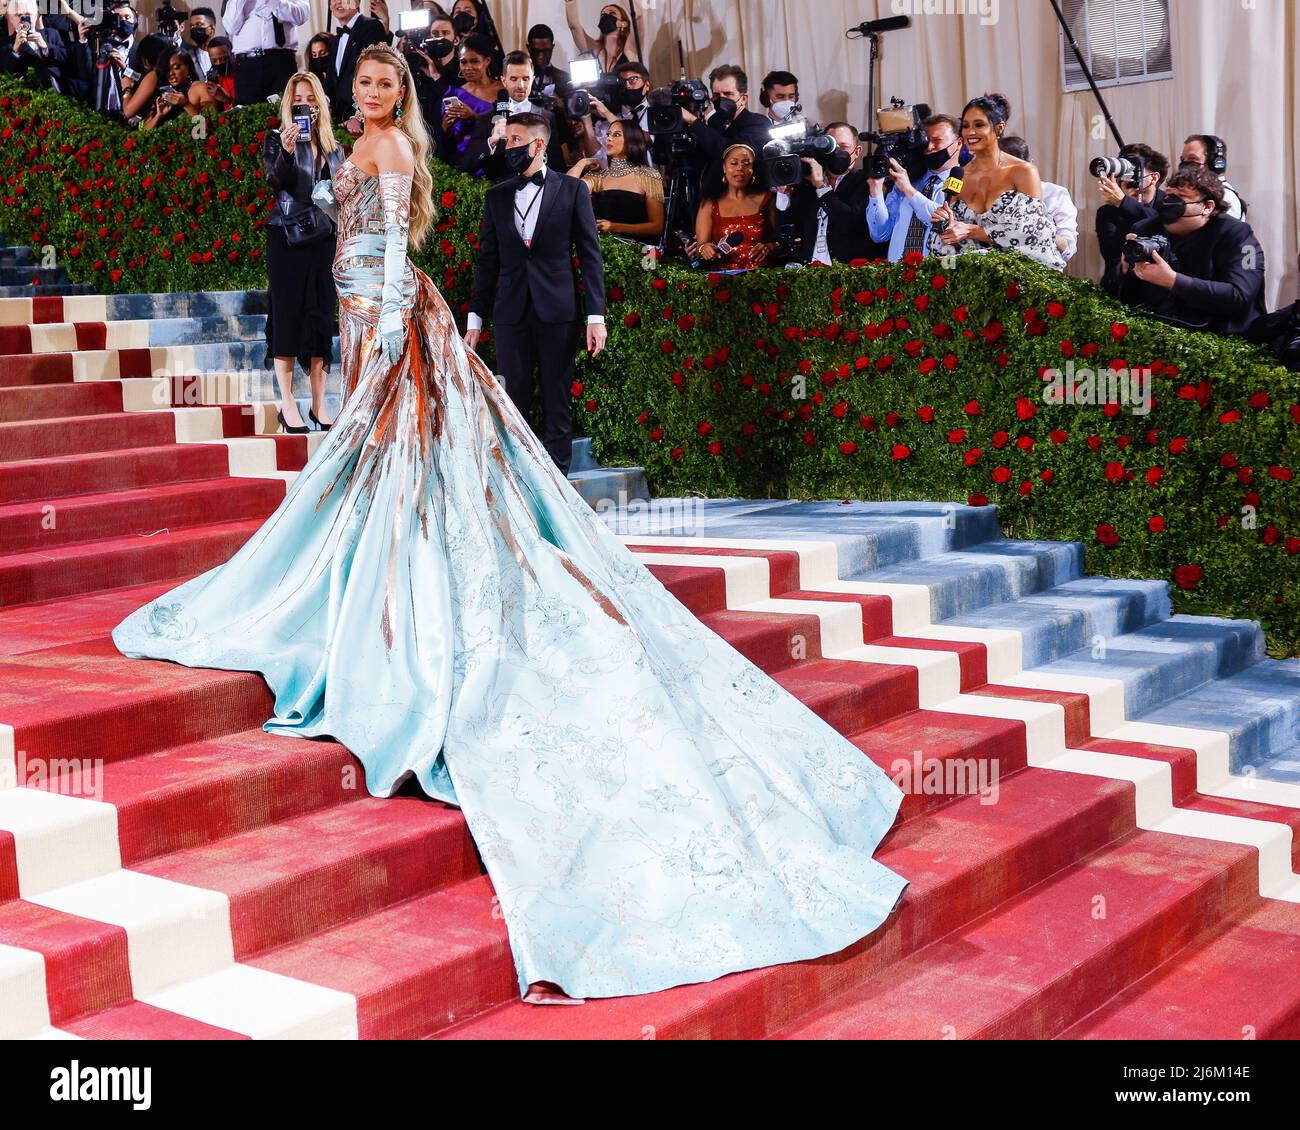 Blake Lively arrives on the red carpet for The Met Gala at The Metropolitan Museum of Art celebrating the Costume Institute opening of 'In America: An Anthology of Fashion' in New York City on Monday, May 2, 2022.       Photo by John Angelillo/UPI Stock Photo